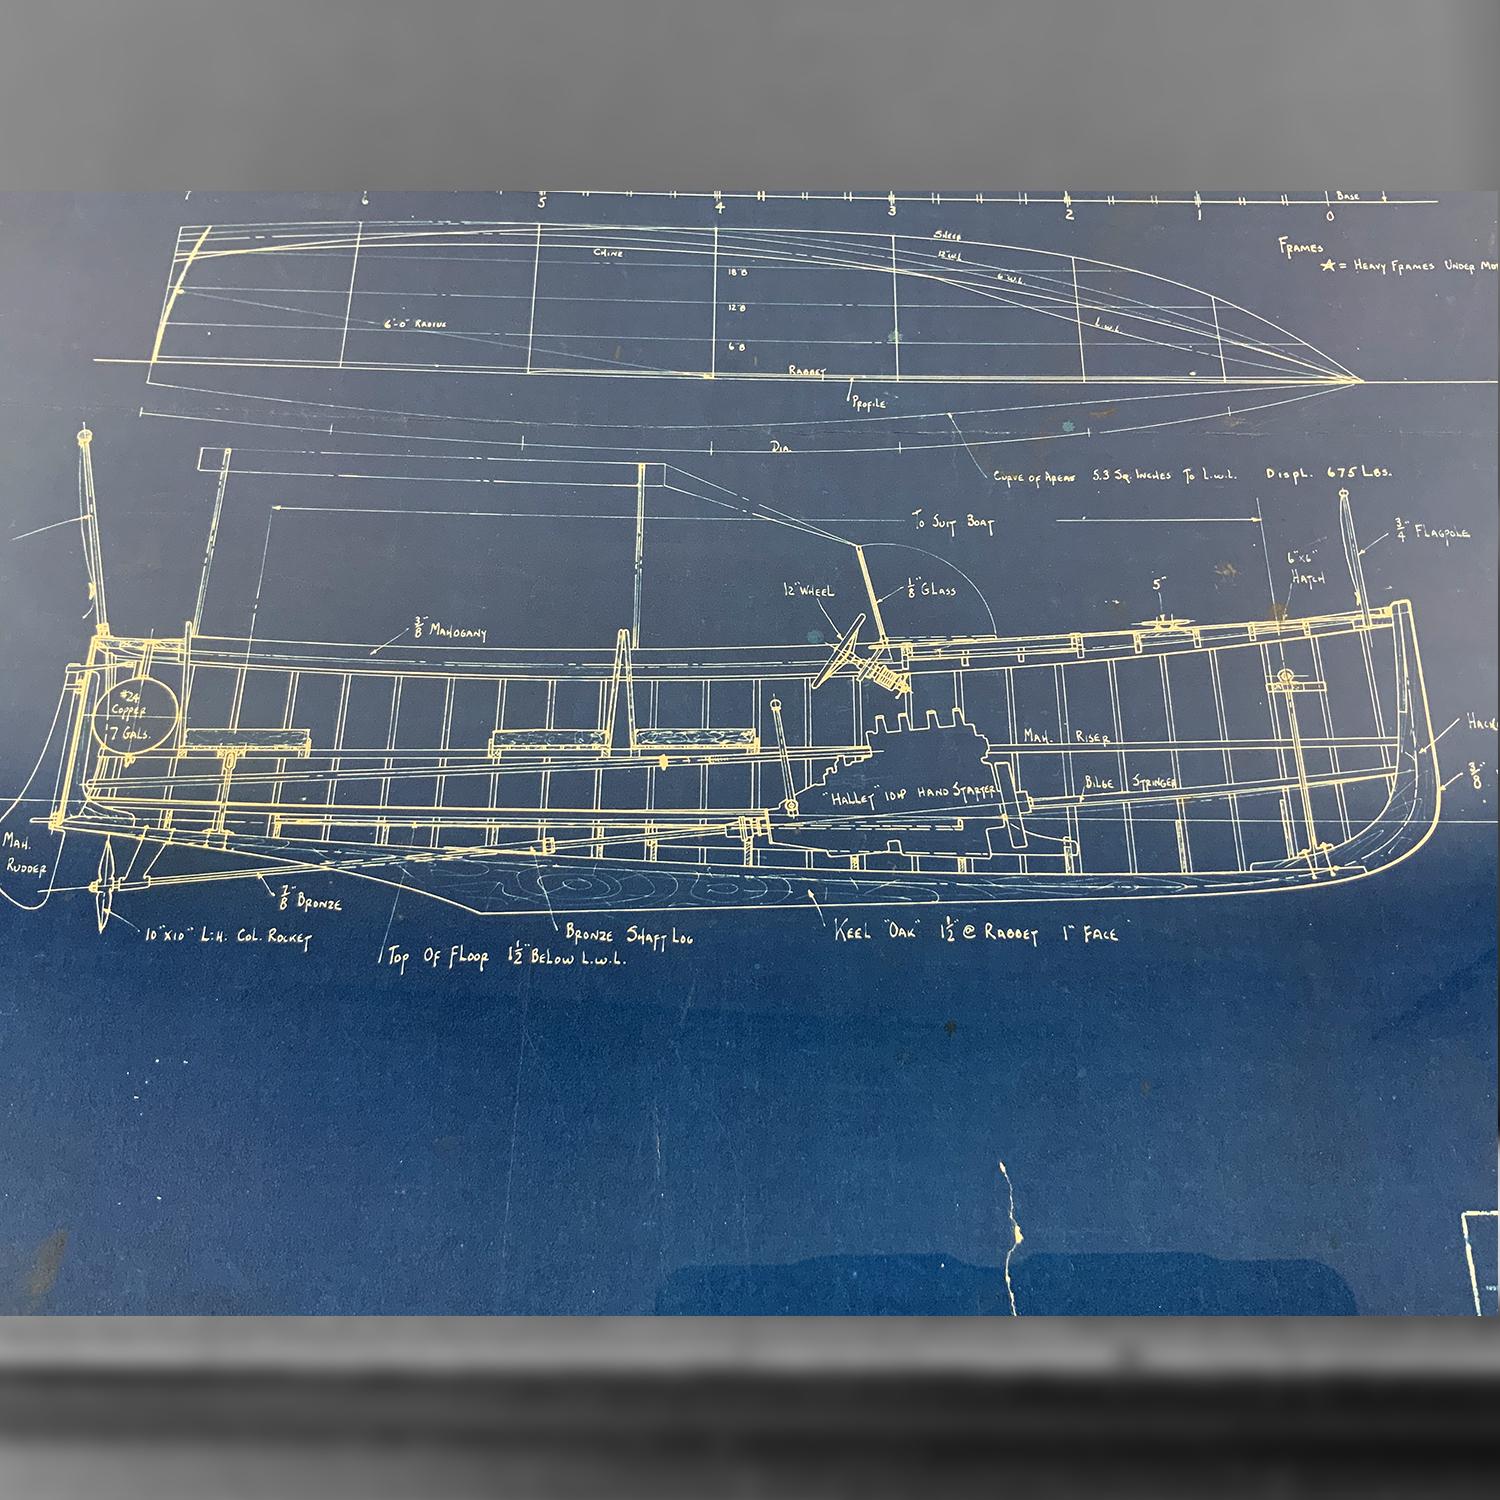 Paper Charming Original Blueprint for Yacht Tender Onboard Yacht Rima For Sale